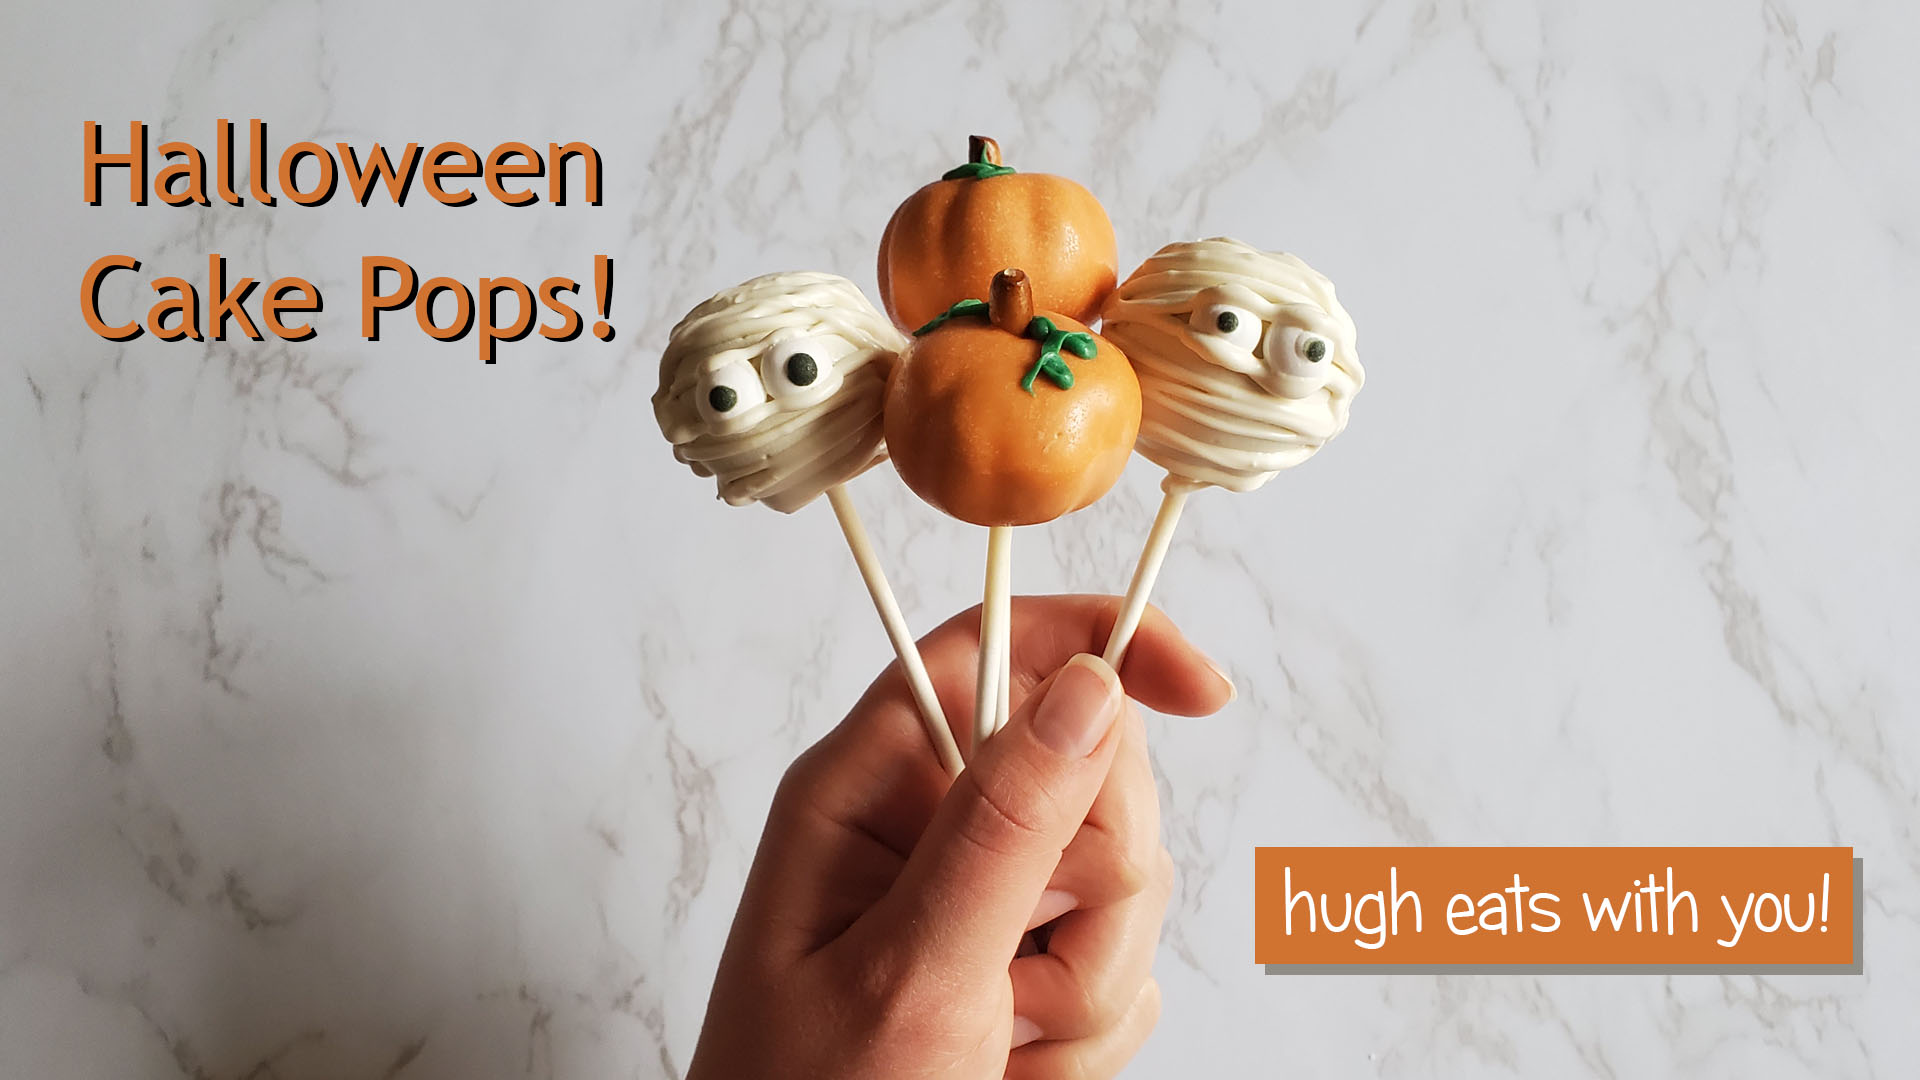 A hand holds up mummy and pumpkin cake pops in front of a white marble background. The photo reads, "Halloween Cake Pops!" in the upper left corner and "hugh eats with you" in the bottom right corner.